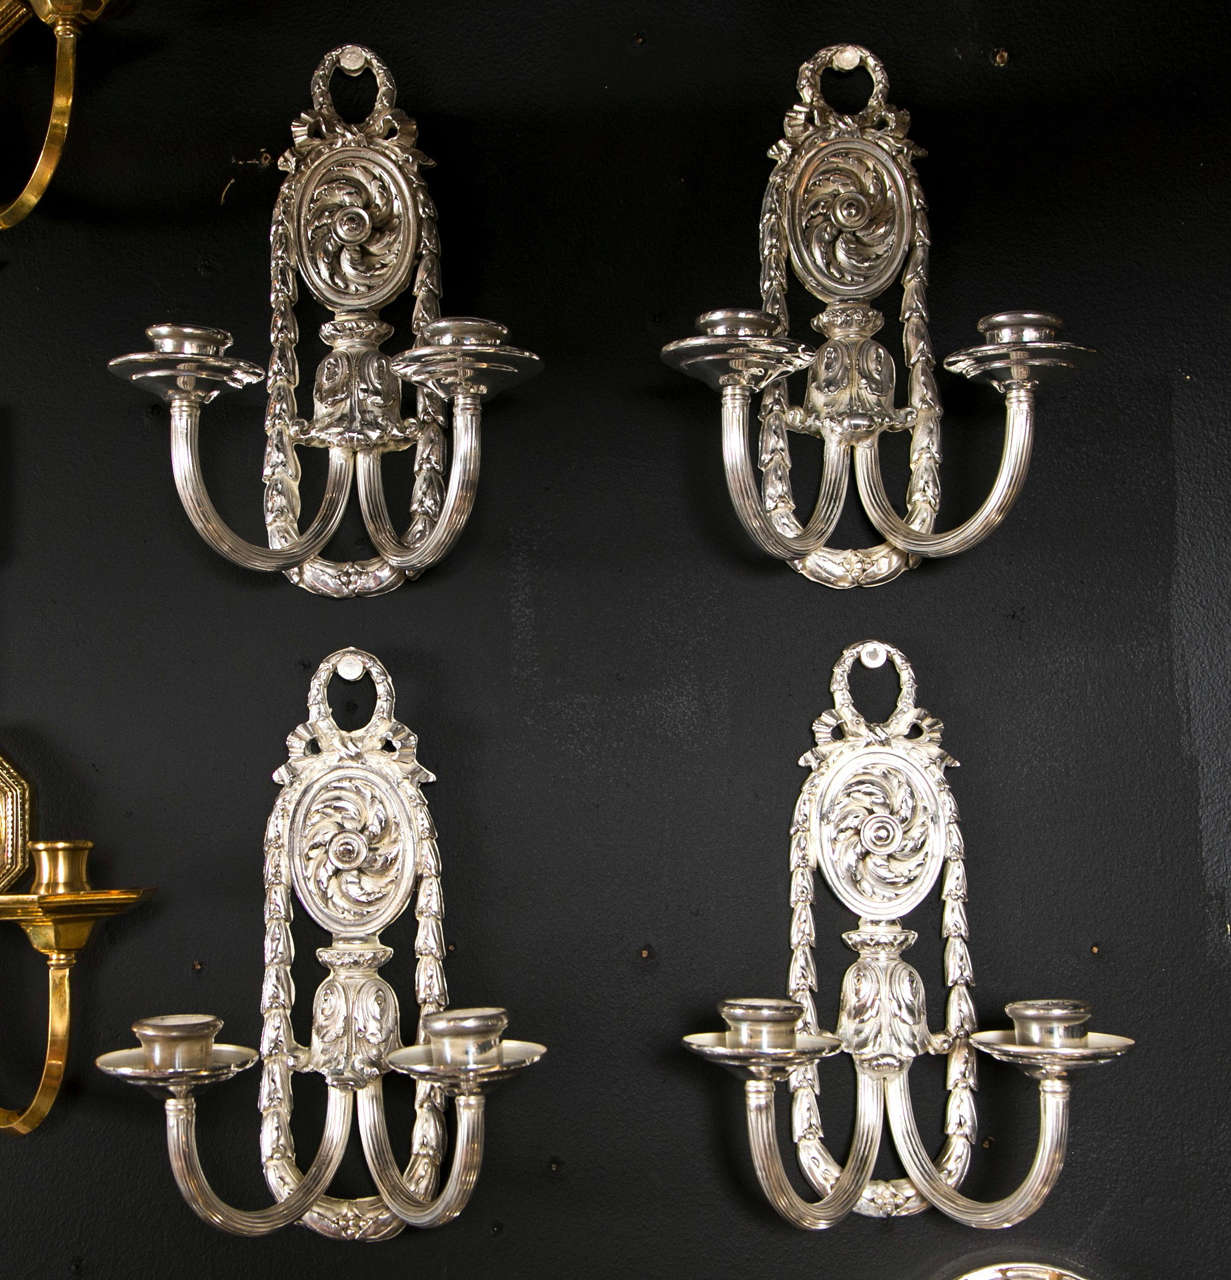 A Pair of ornate silver plated Caldwell sconces circa 1920. 